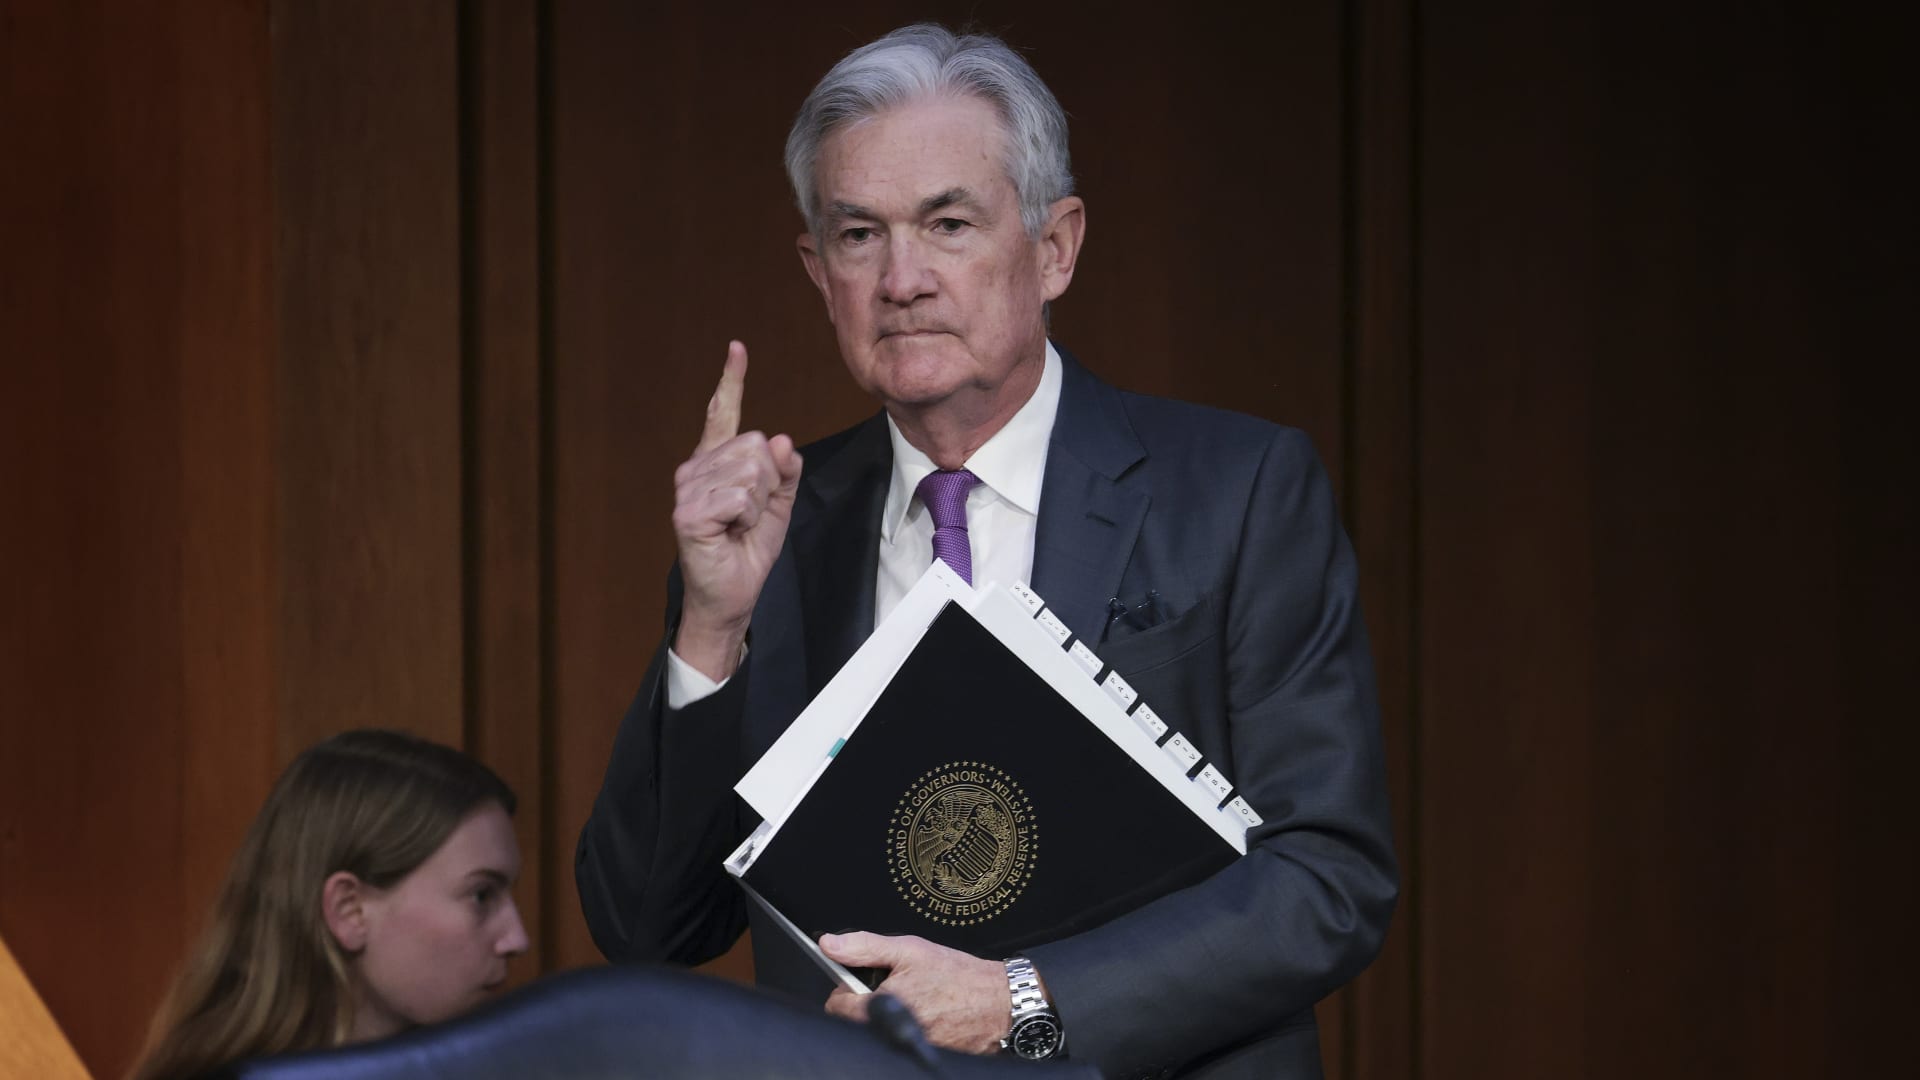 Federal Reserve Chair Jerome Powell arrives for testimony before the Senate Banking Committee March 7, 2023 in Washington, DC.